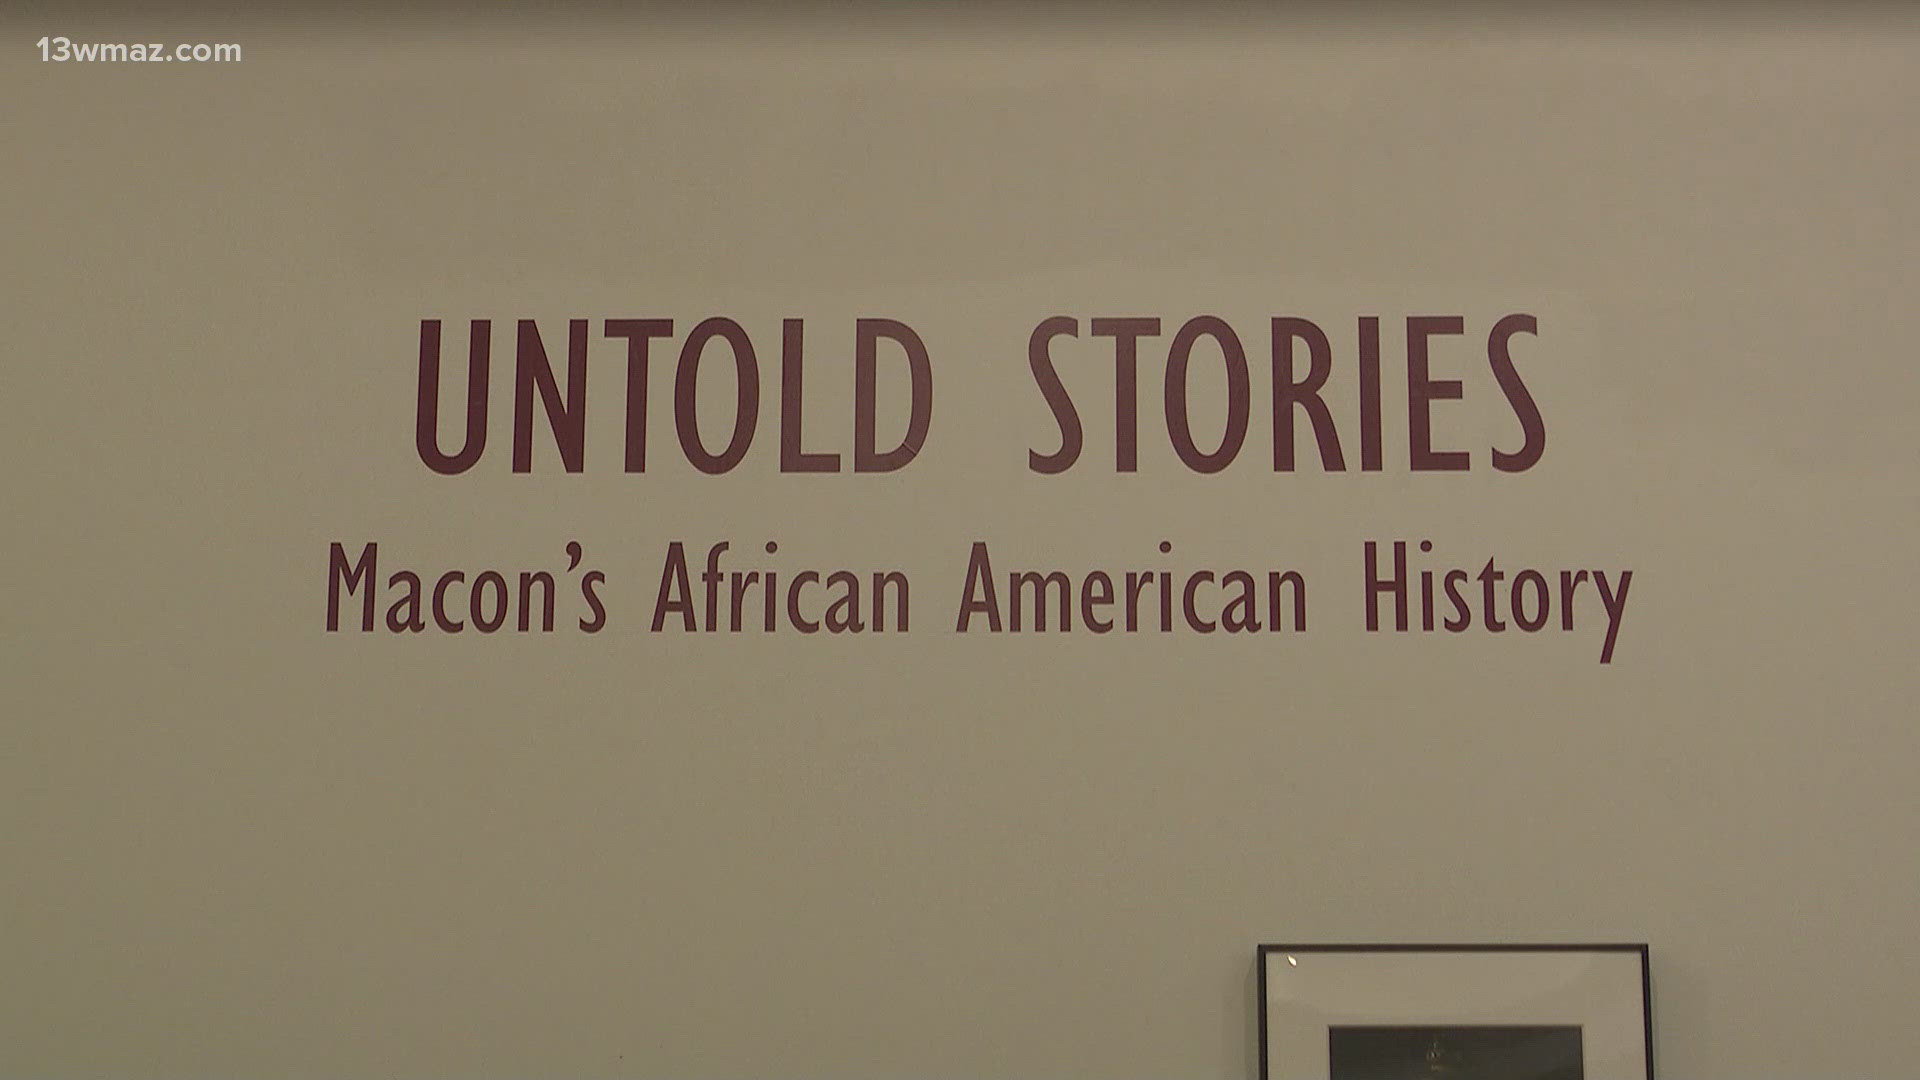 The exhibit is called "Untold Stories: Macon's African American History" and local history is on display for thousands of visitors to embrace their history.